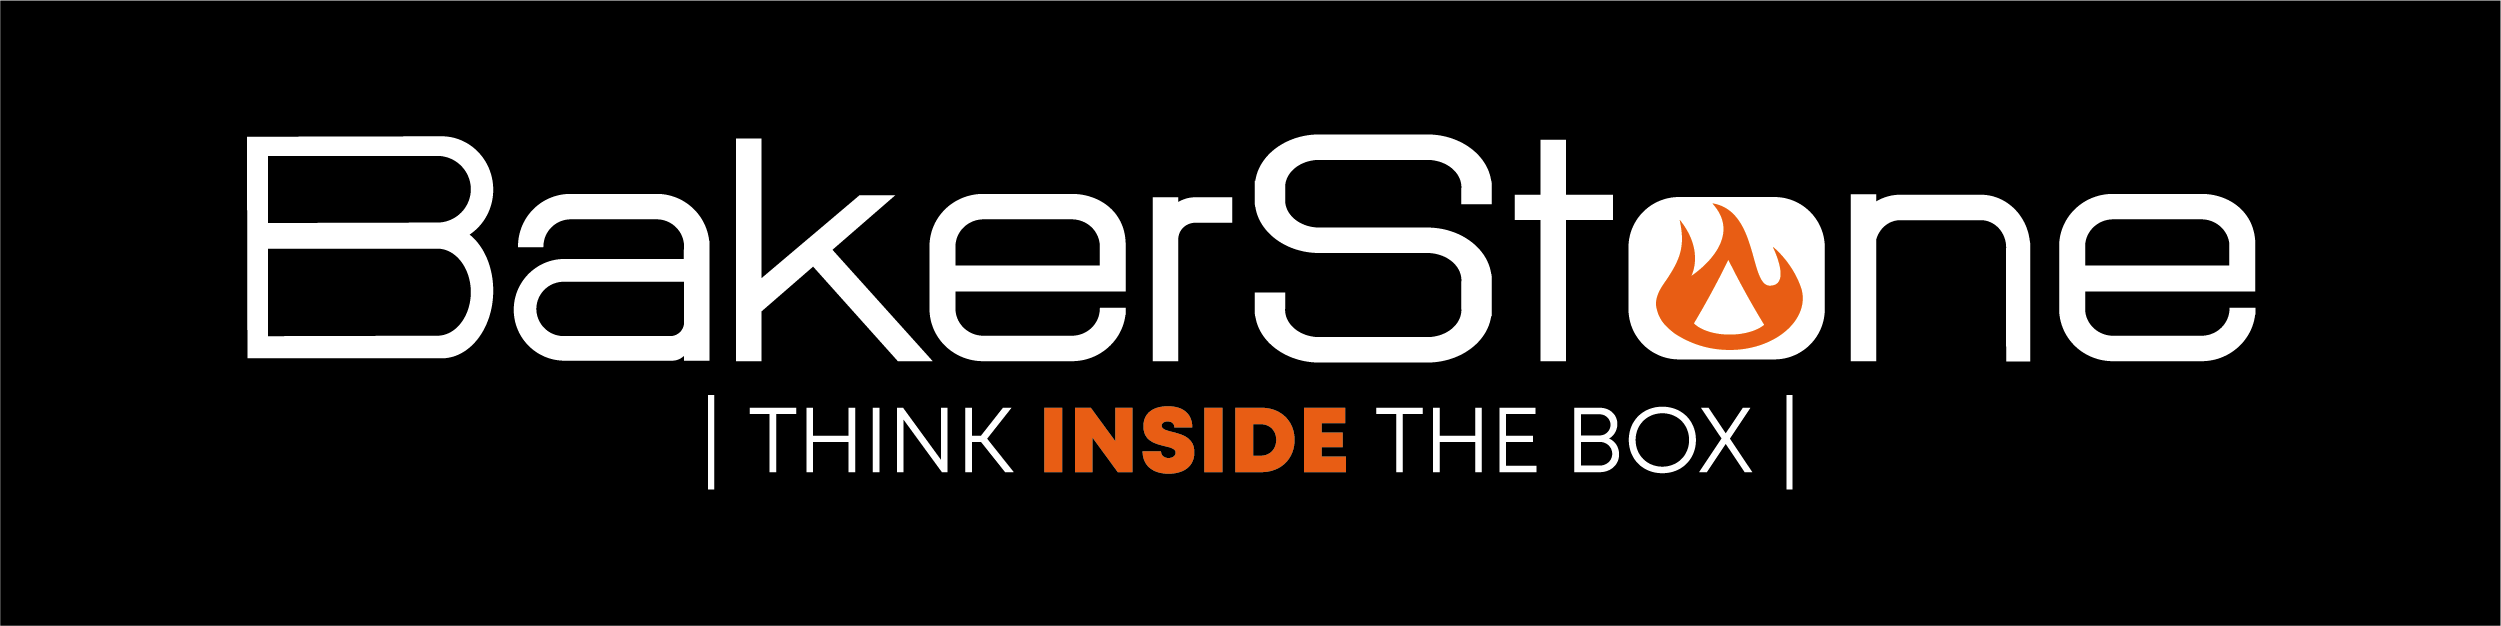 BakerStone - White Logo - Think Inside the Box.png